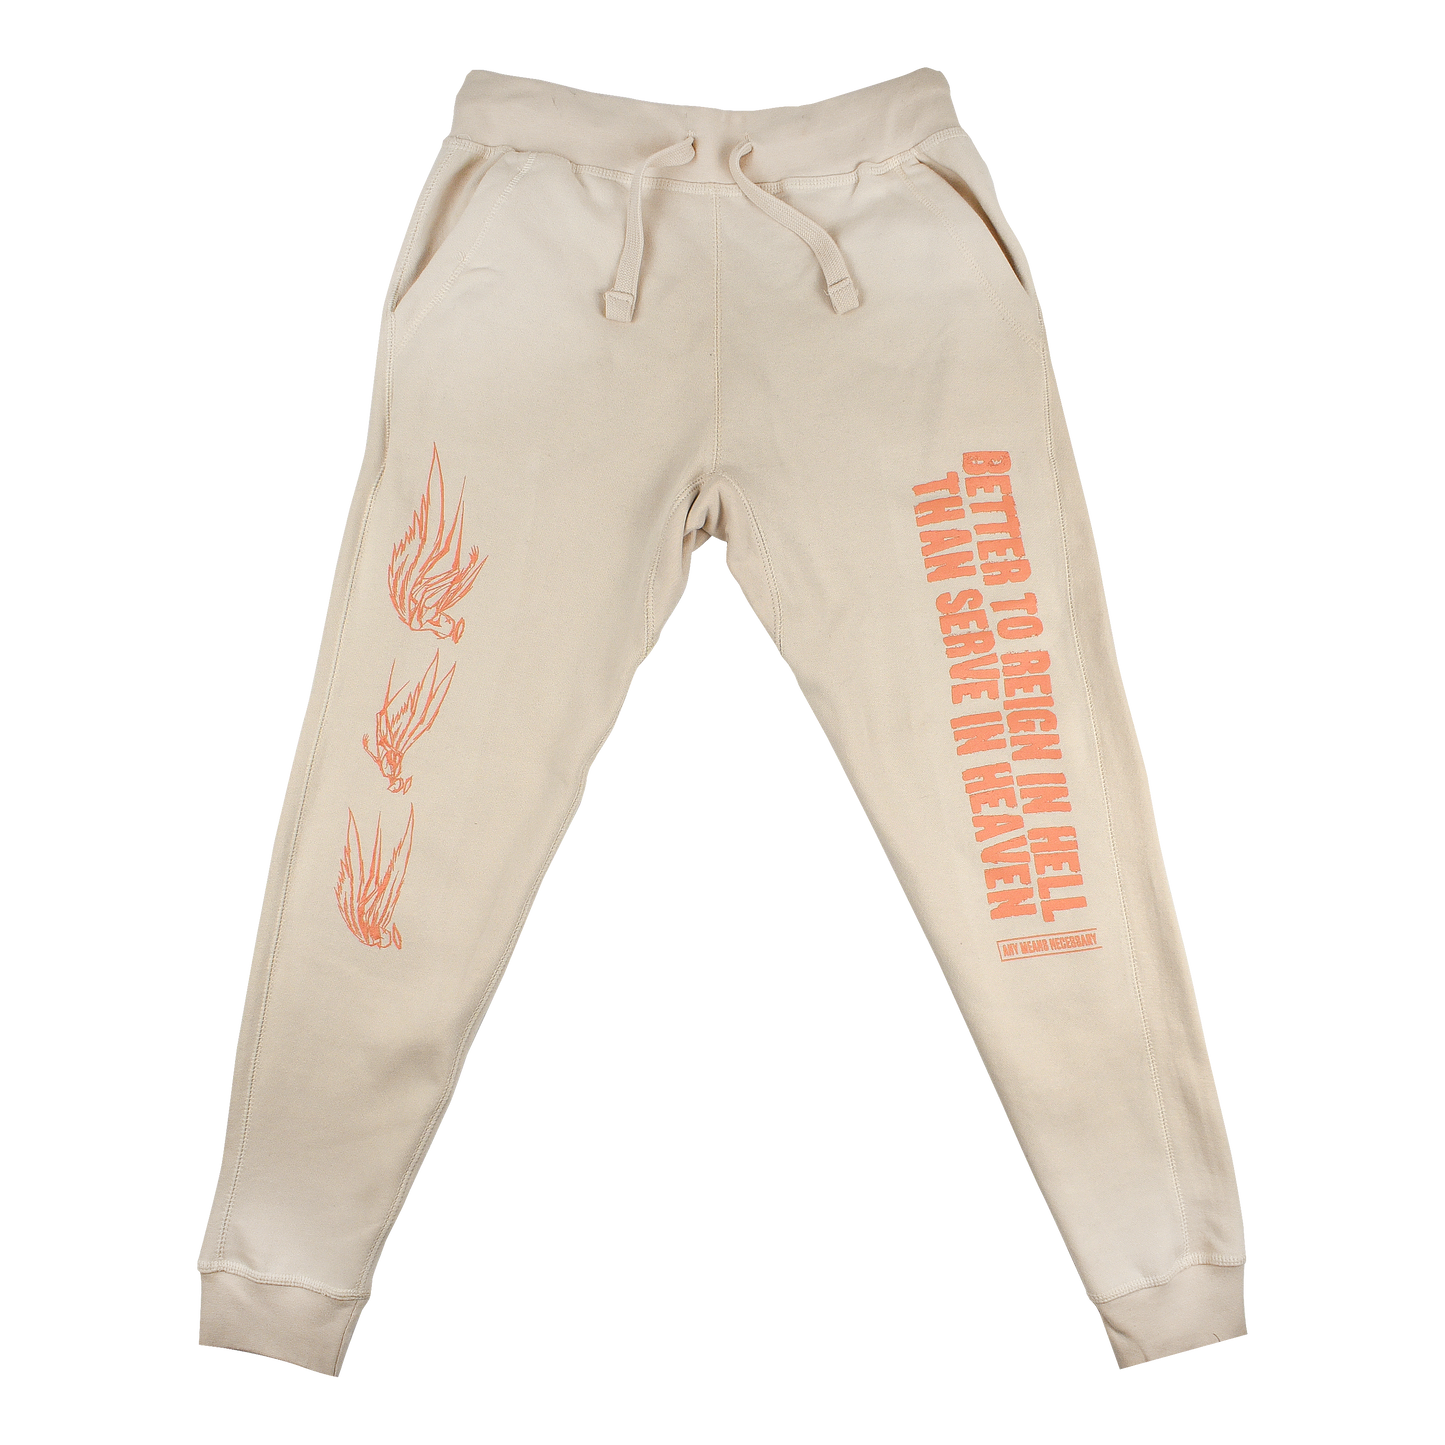 any means necessary shawn coss hel sweat pants joggers tan sandshell